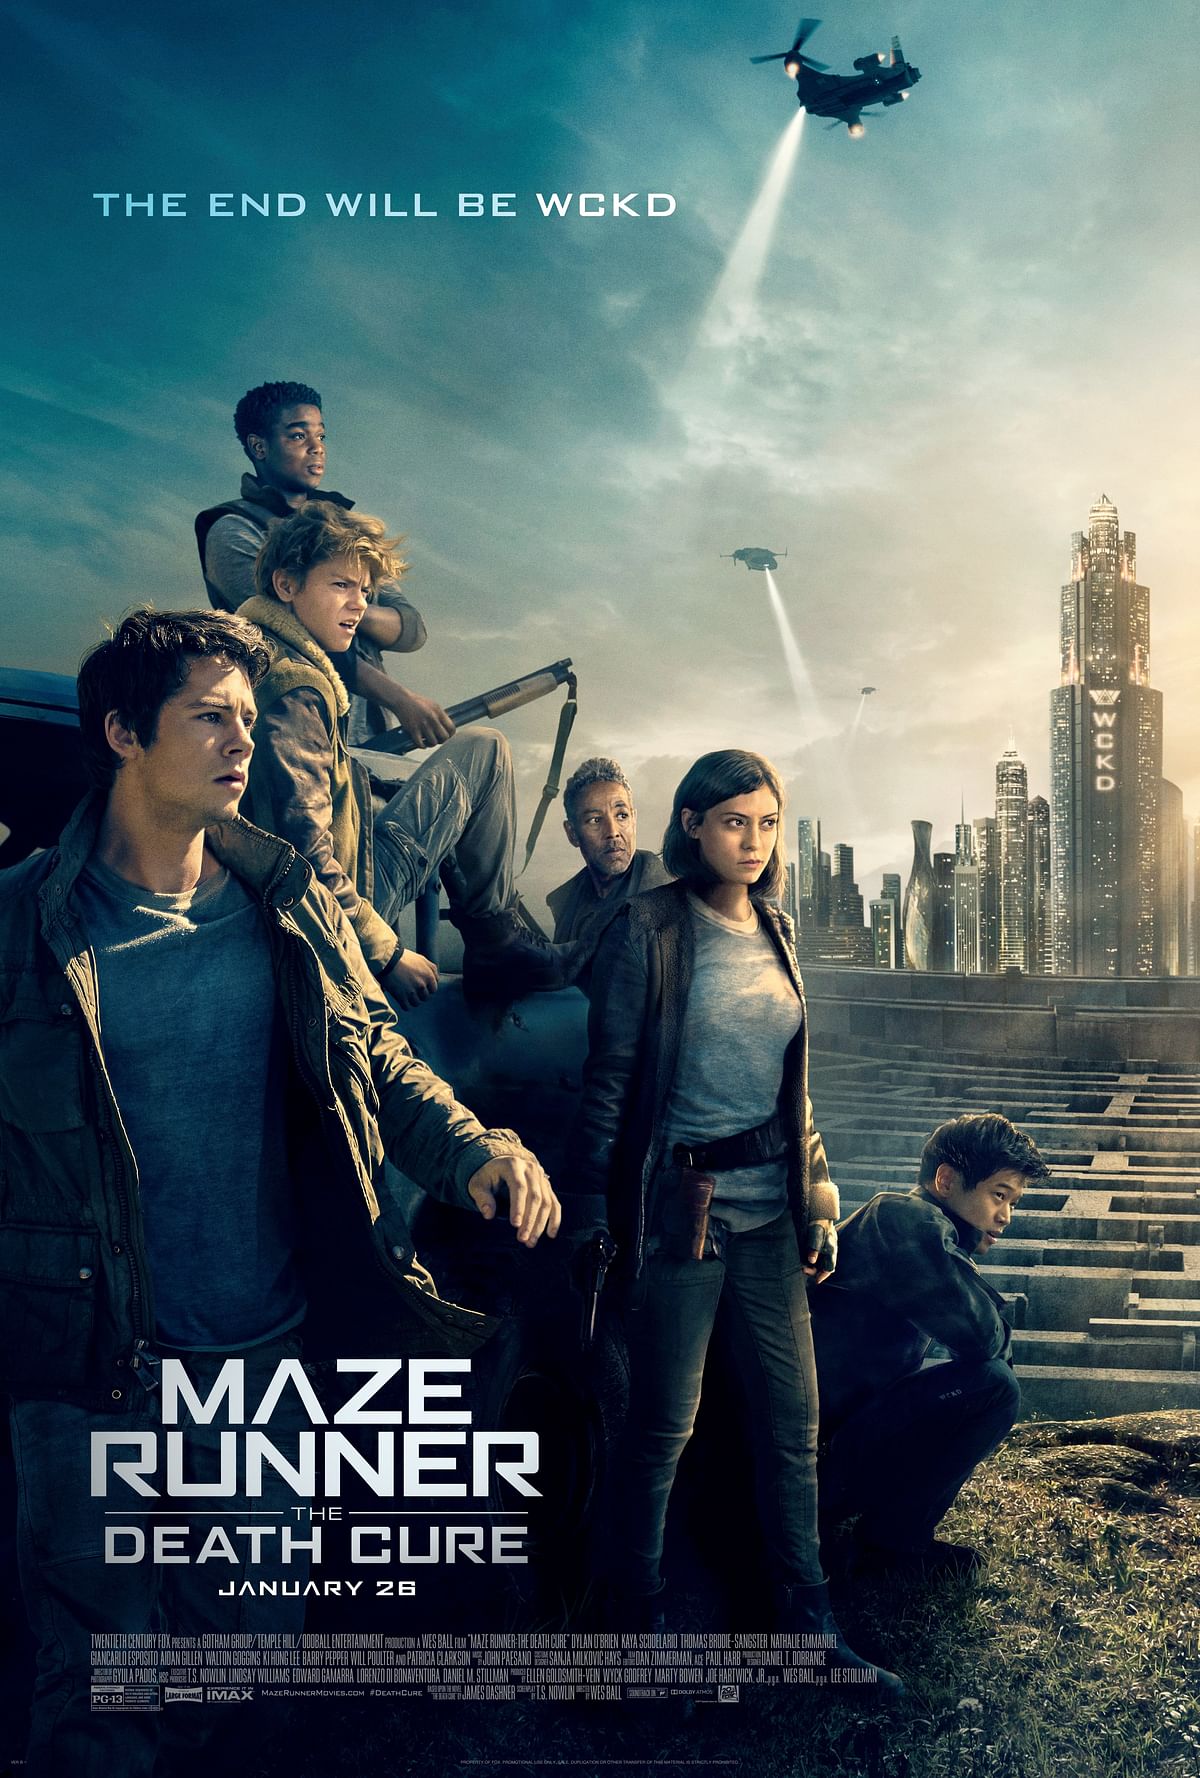 Is ‘Maze Runner: The Death Cure’ worth a watch?